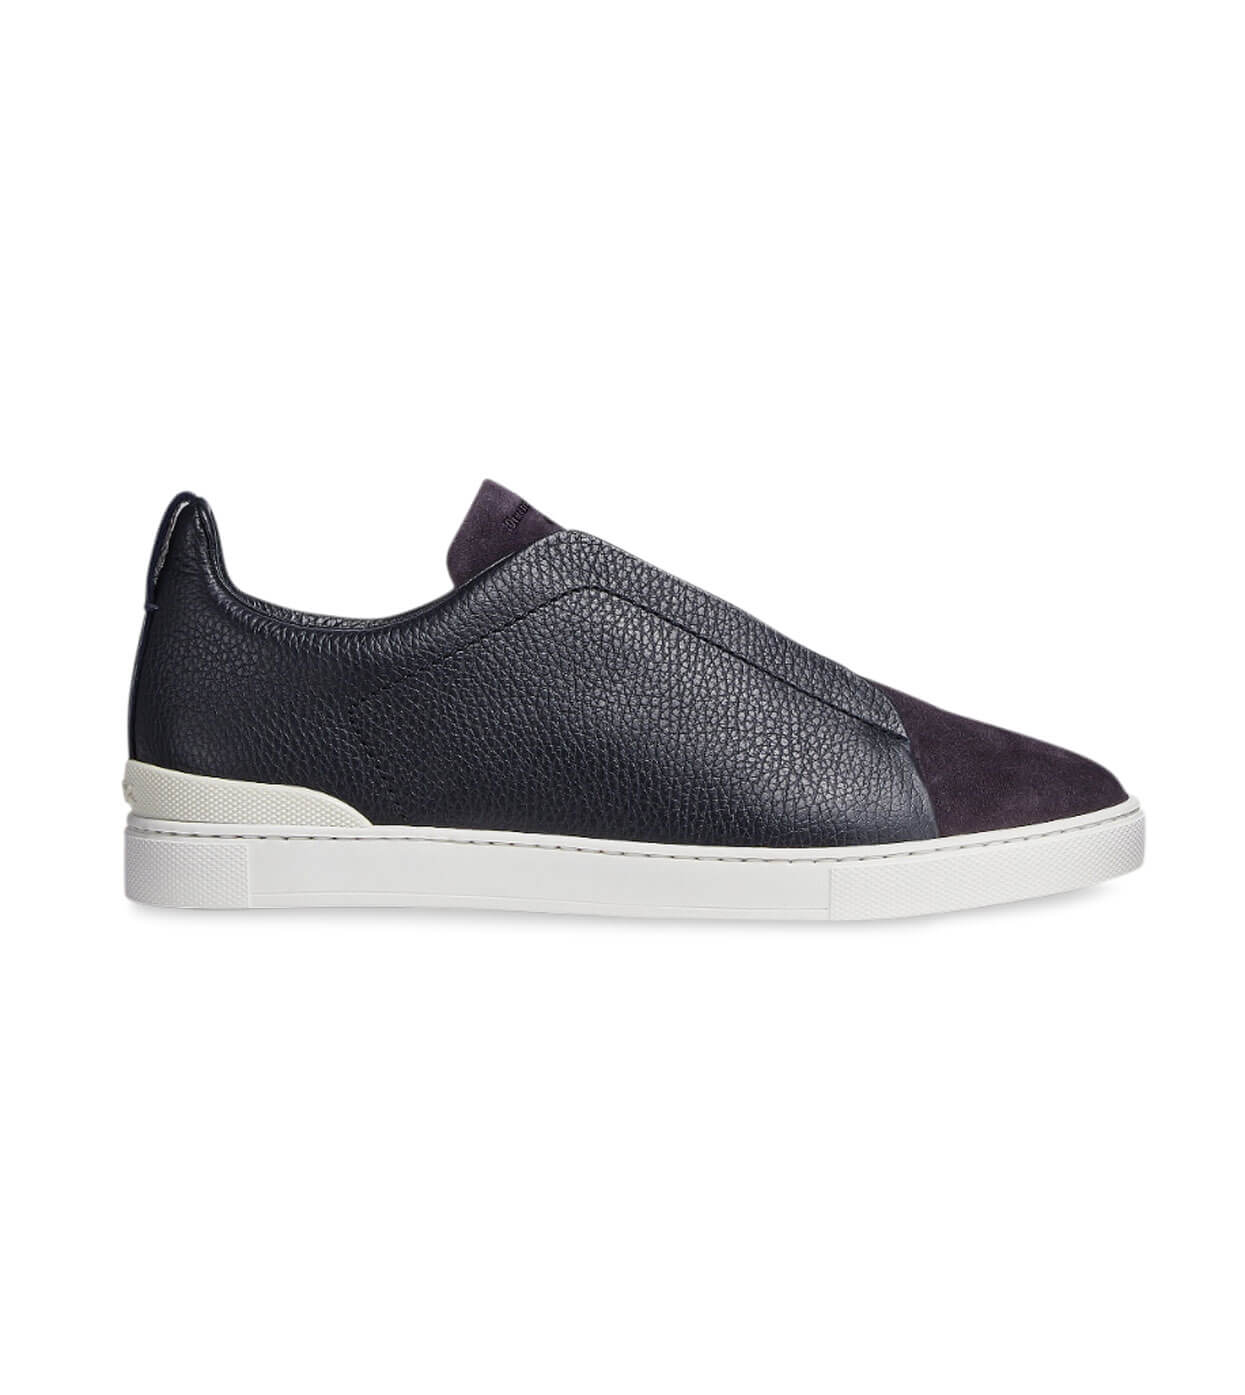 ZEGNA Leather/Suede Low Top Sneaker US Sizing